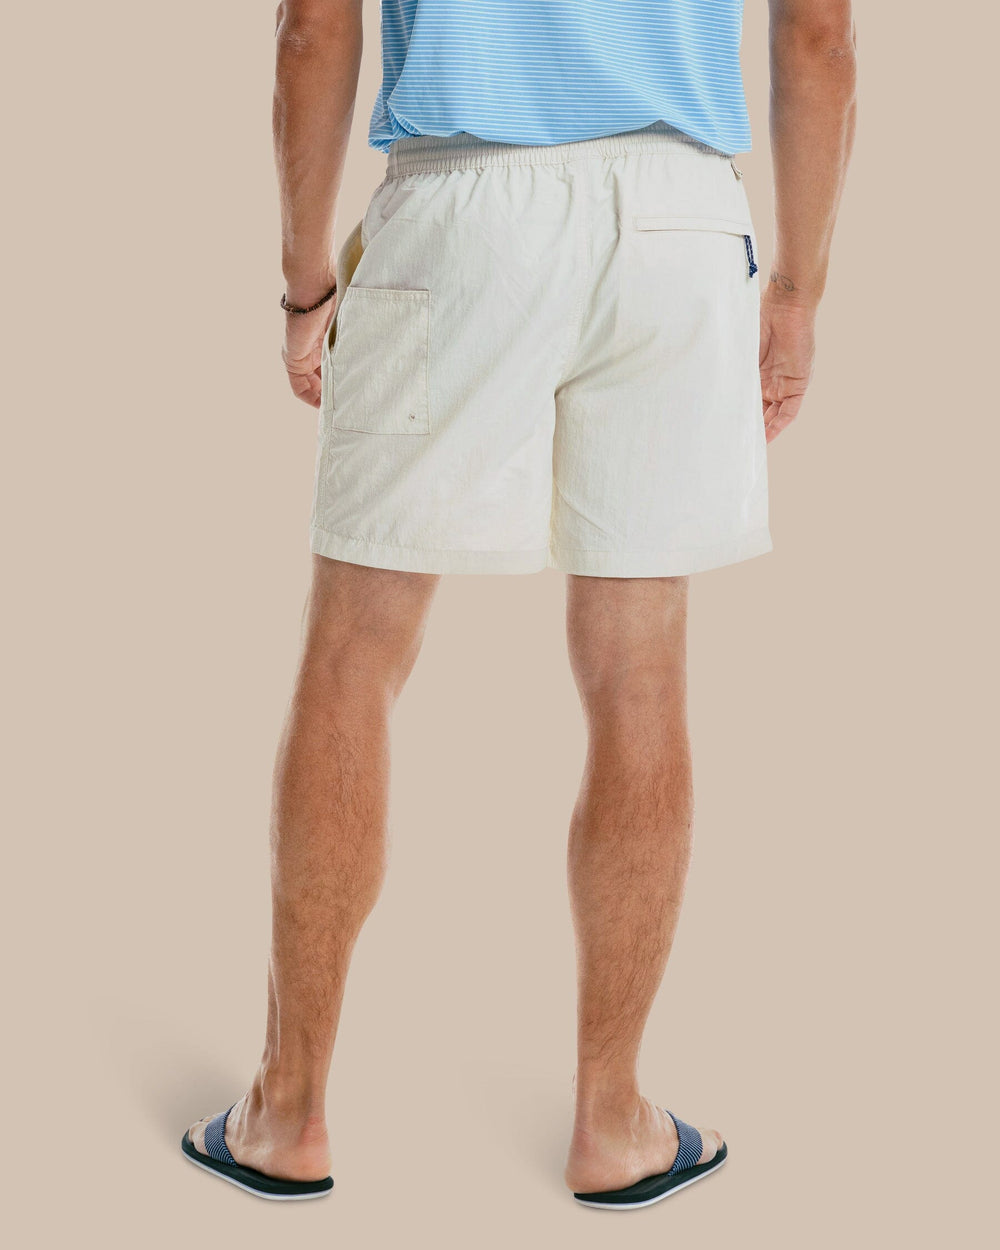 The model back model view of the Men's Shoreline 6 Inch Short by Southern Tide  - Stone